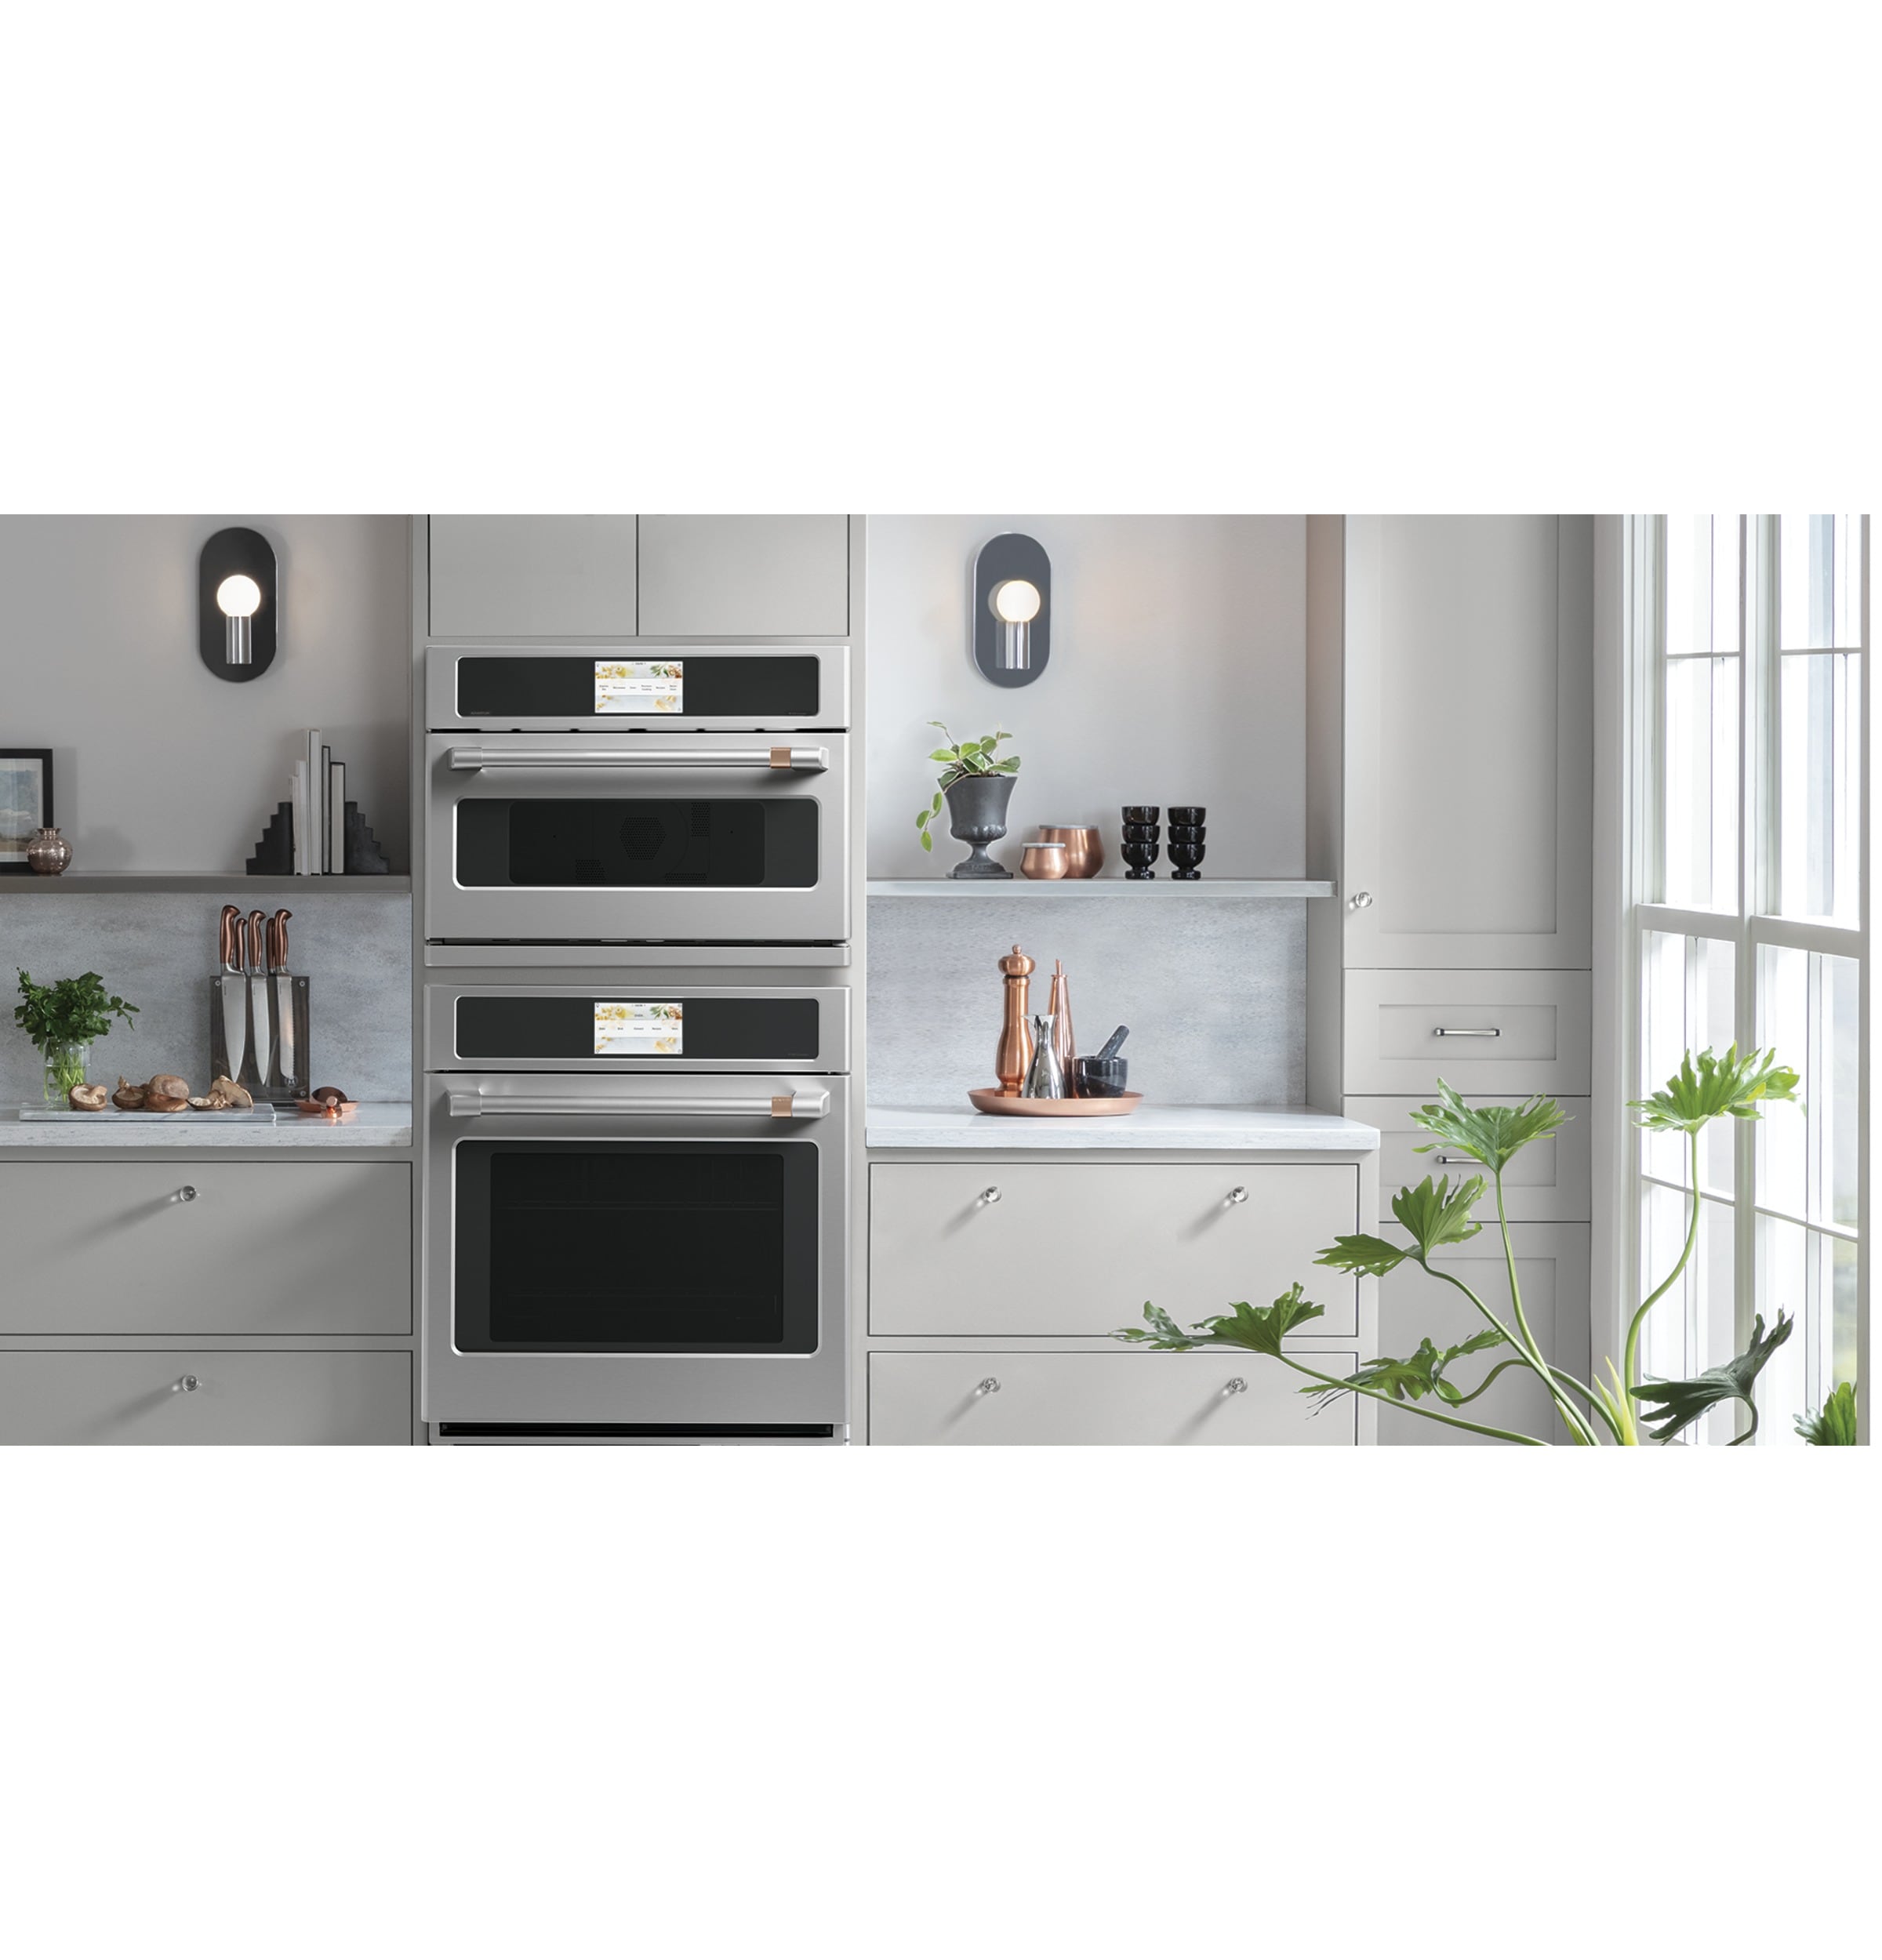 Shop Café at Lowe's: Refrigerators, Wall Ovens and more